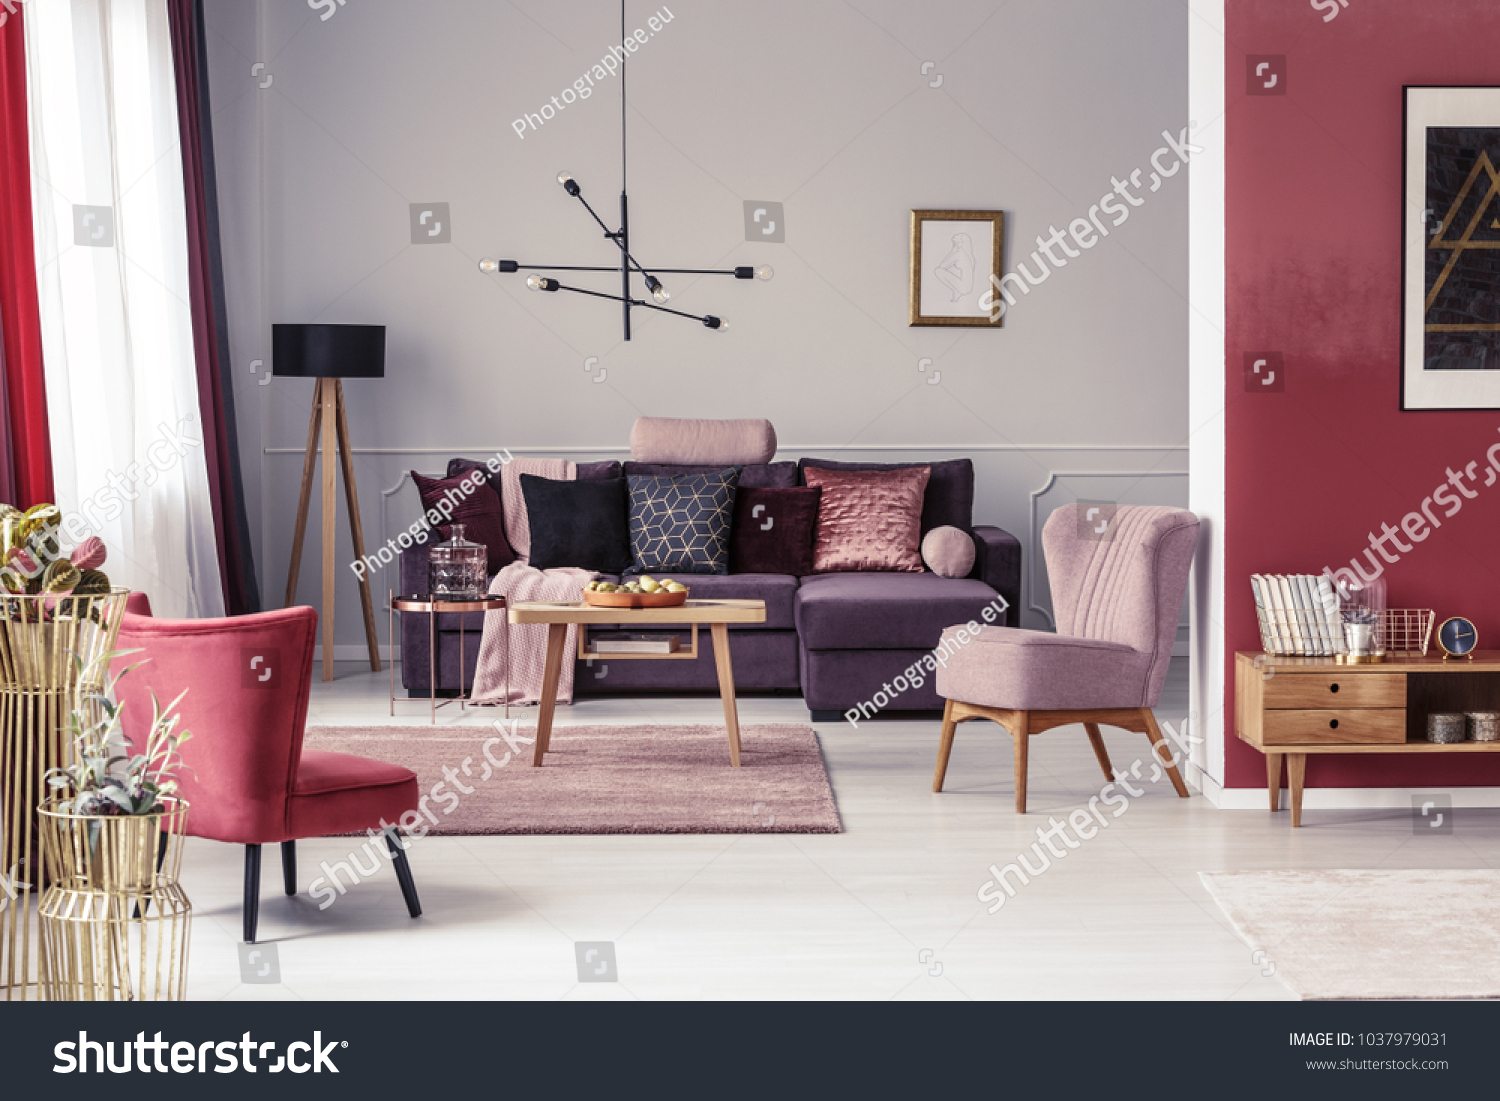 Pink and red armchair in warm living room interior with pillows on settee against the wall with poster #1037979031